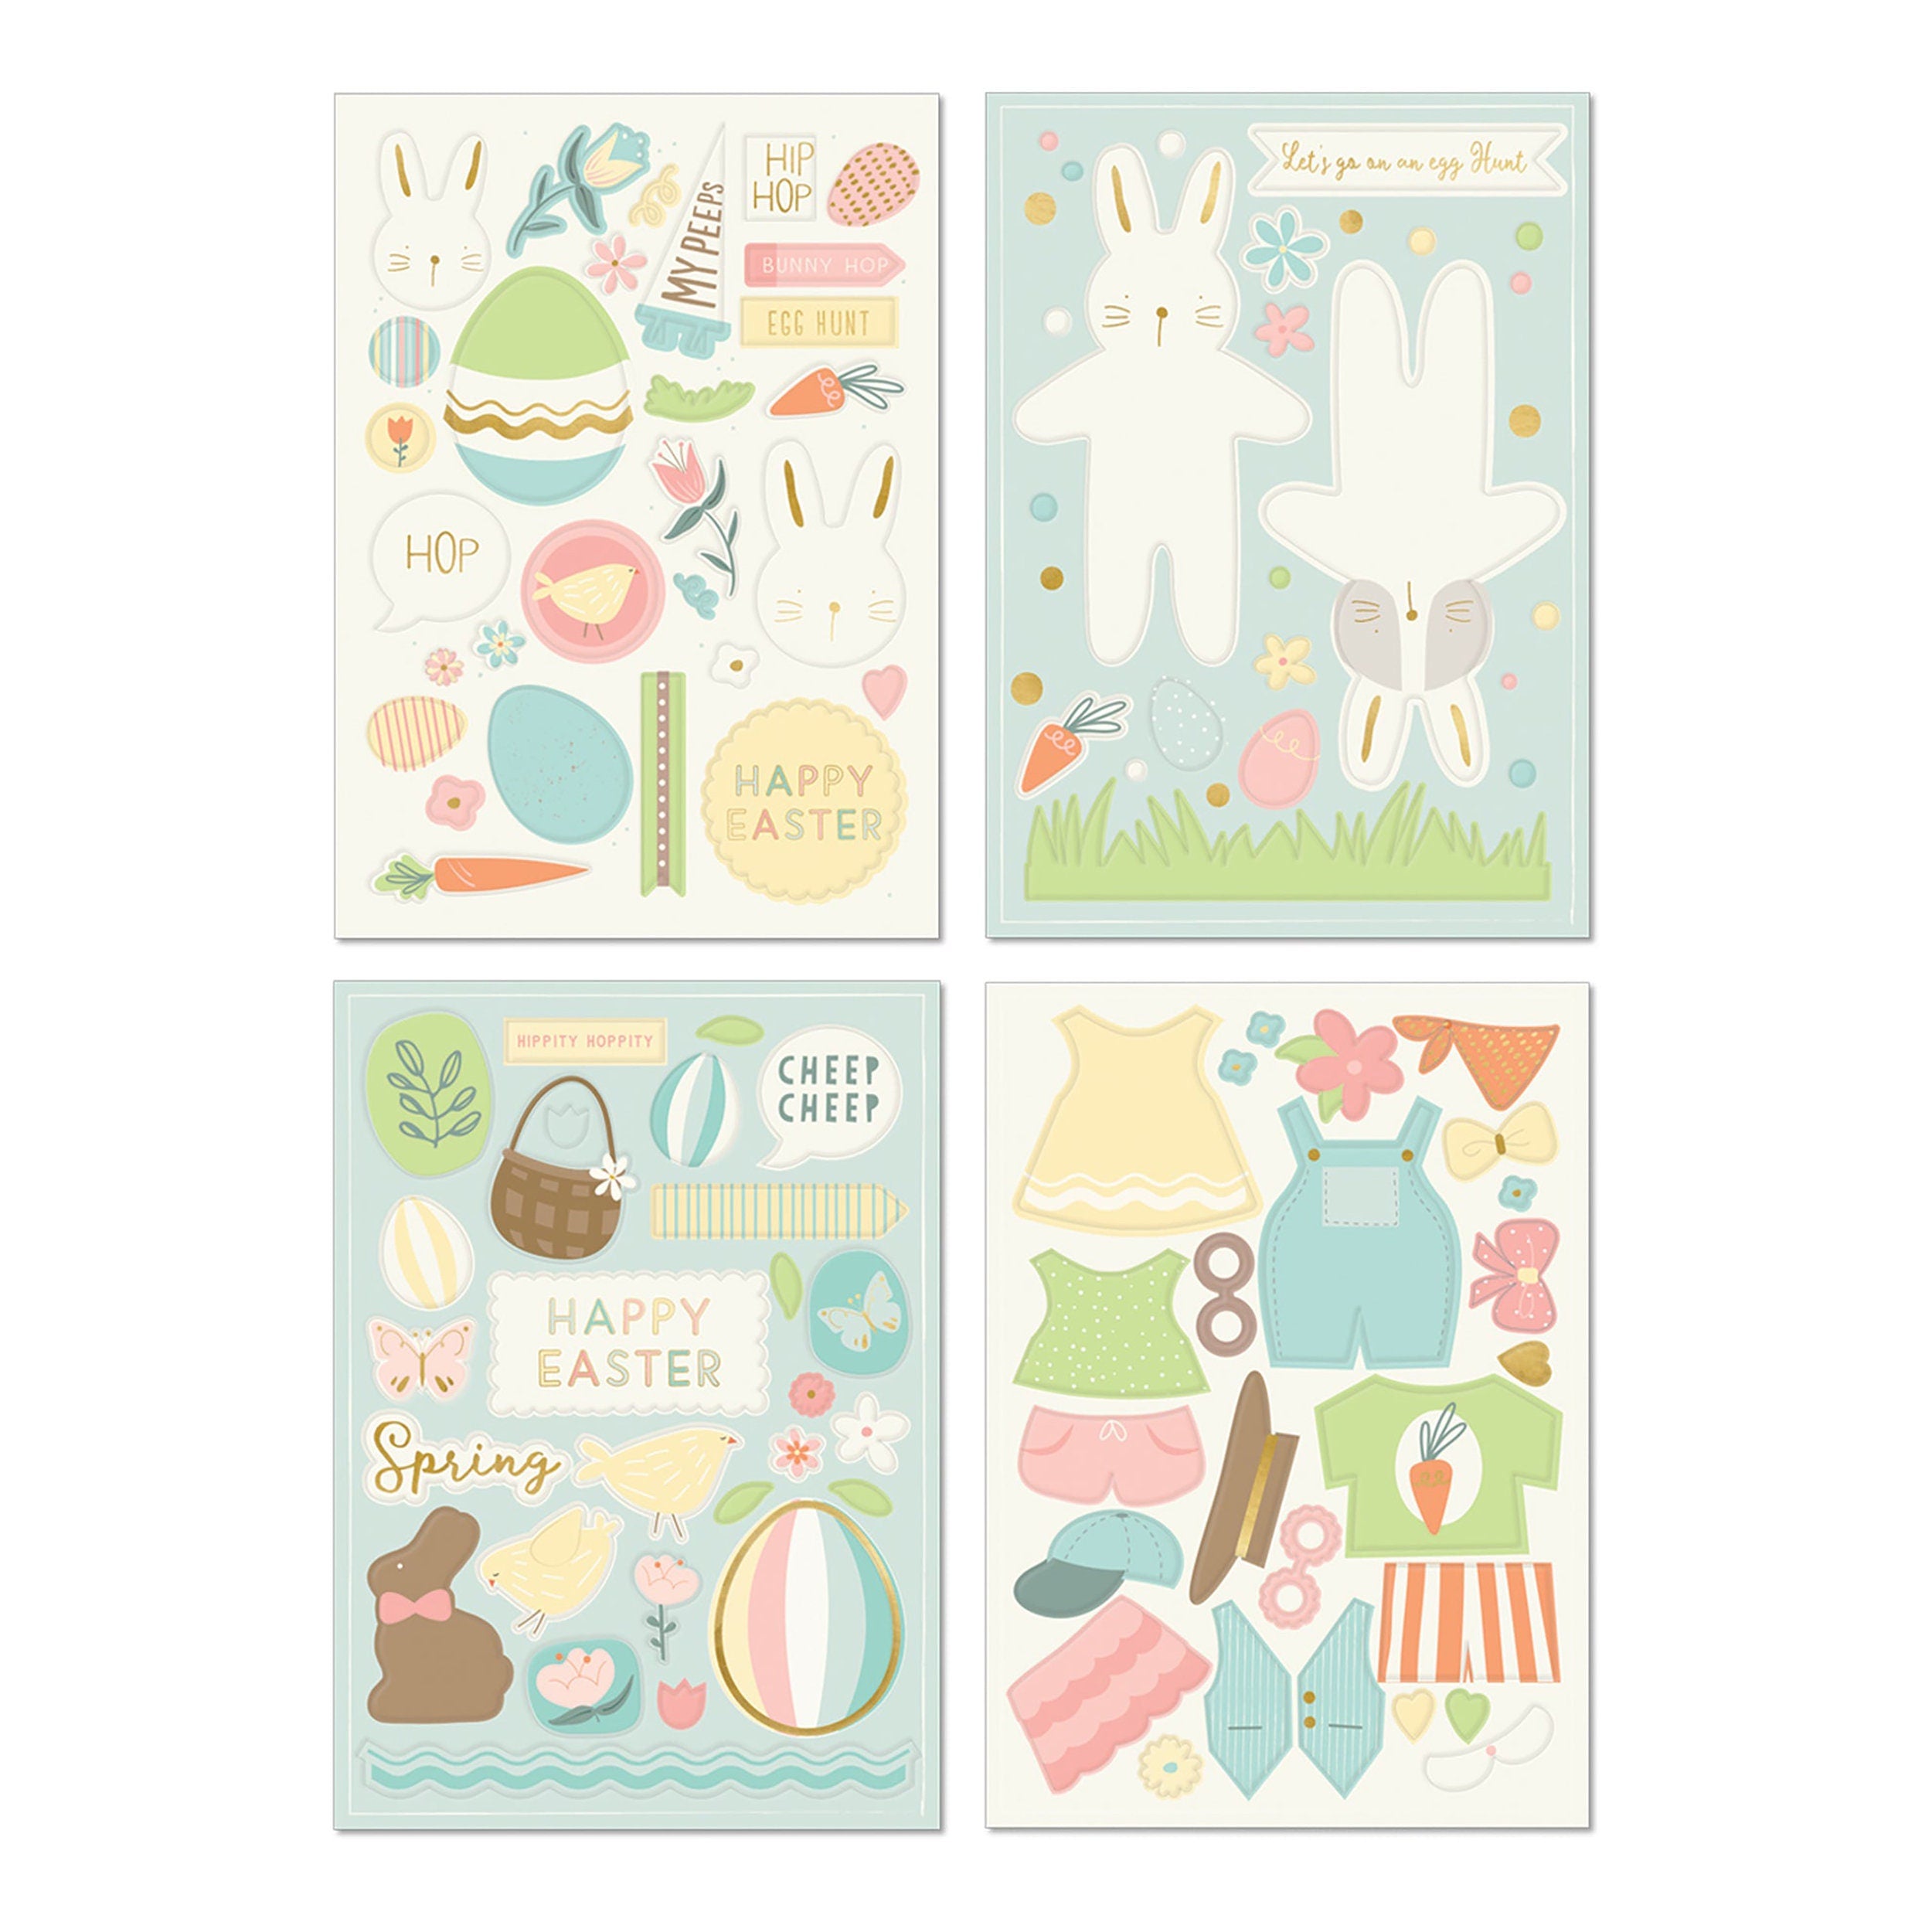 Easter Stickers | Bunny Paper Dolls - Cute Bunny Stickers - Easter Bunny Stickers - Easter Sticker Sheets - Easter Supplies - Easter Basket